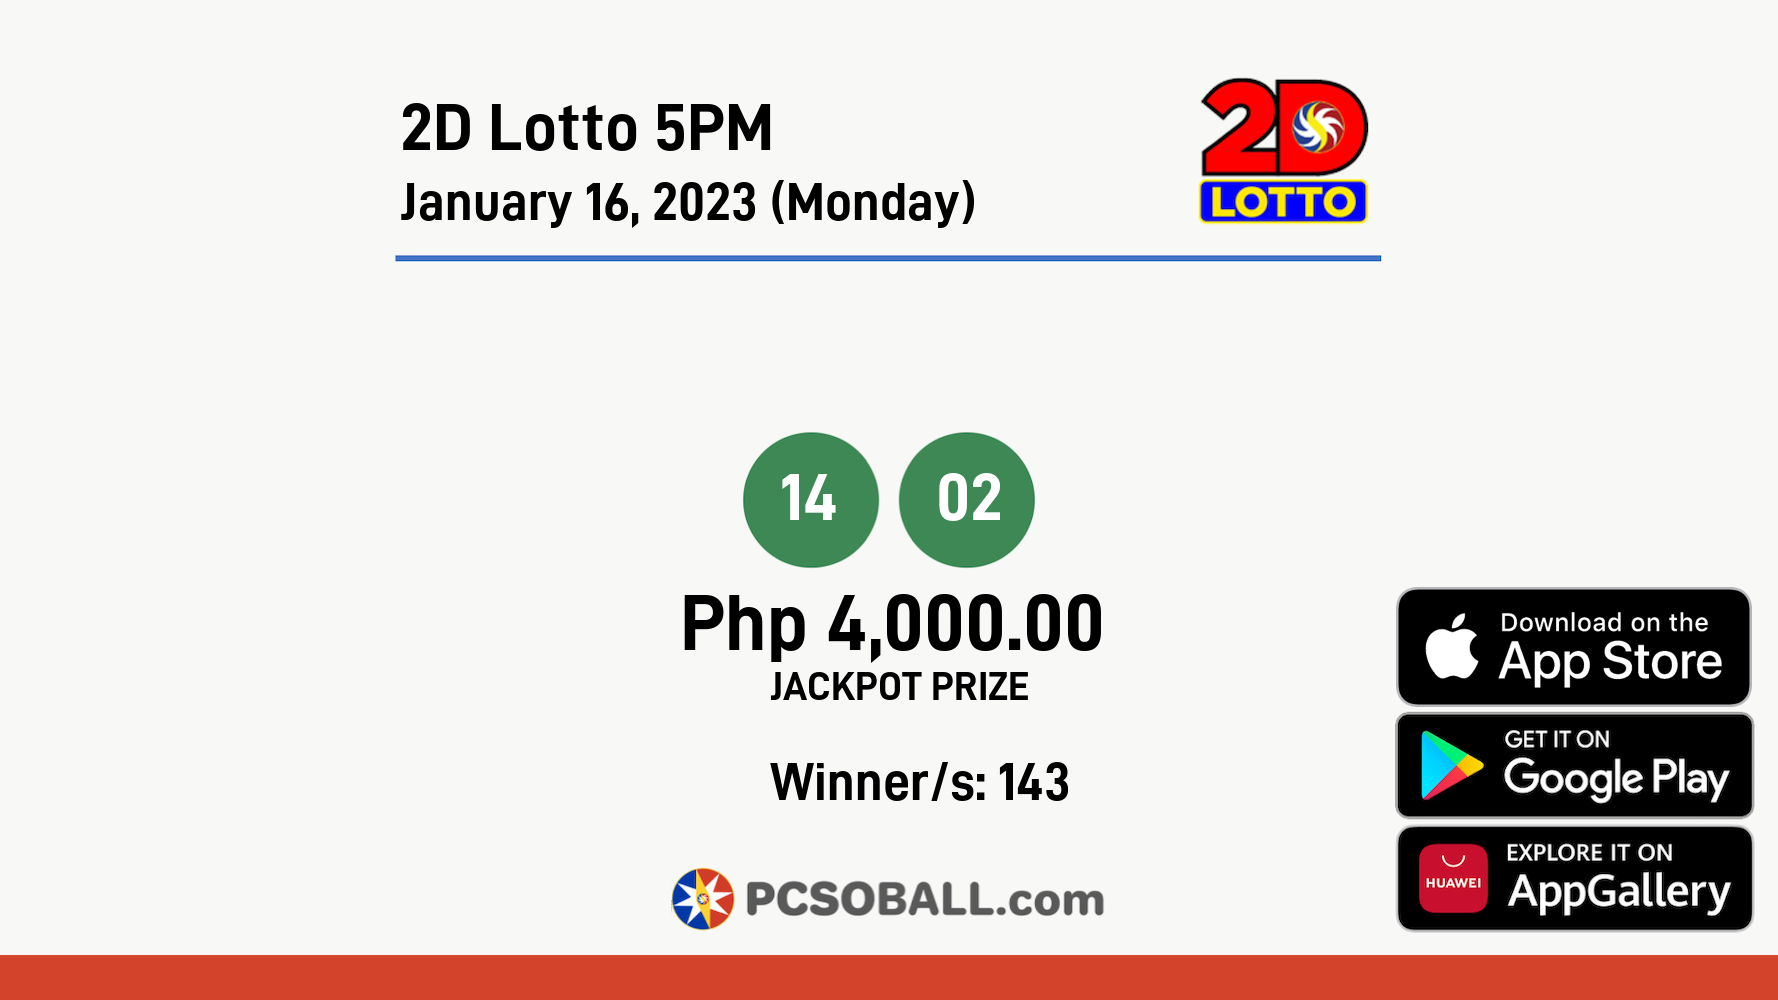 2D Lotto 5PM January 16, 2023 (Monday) Result